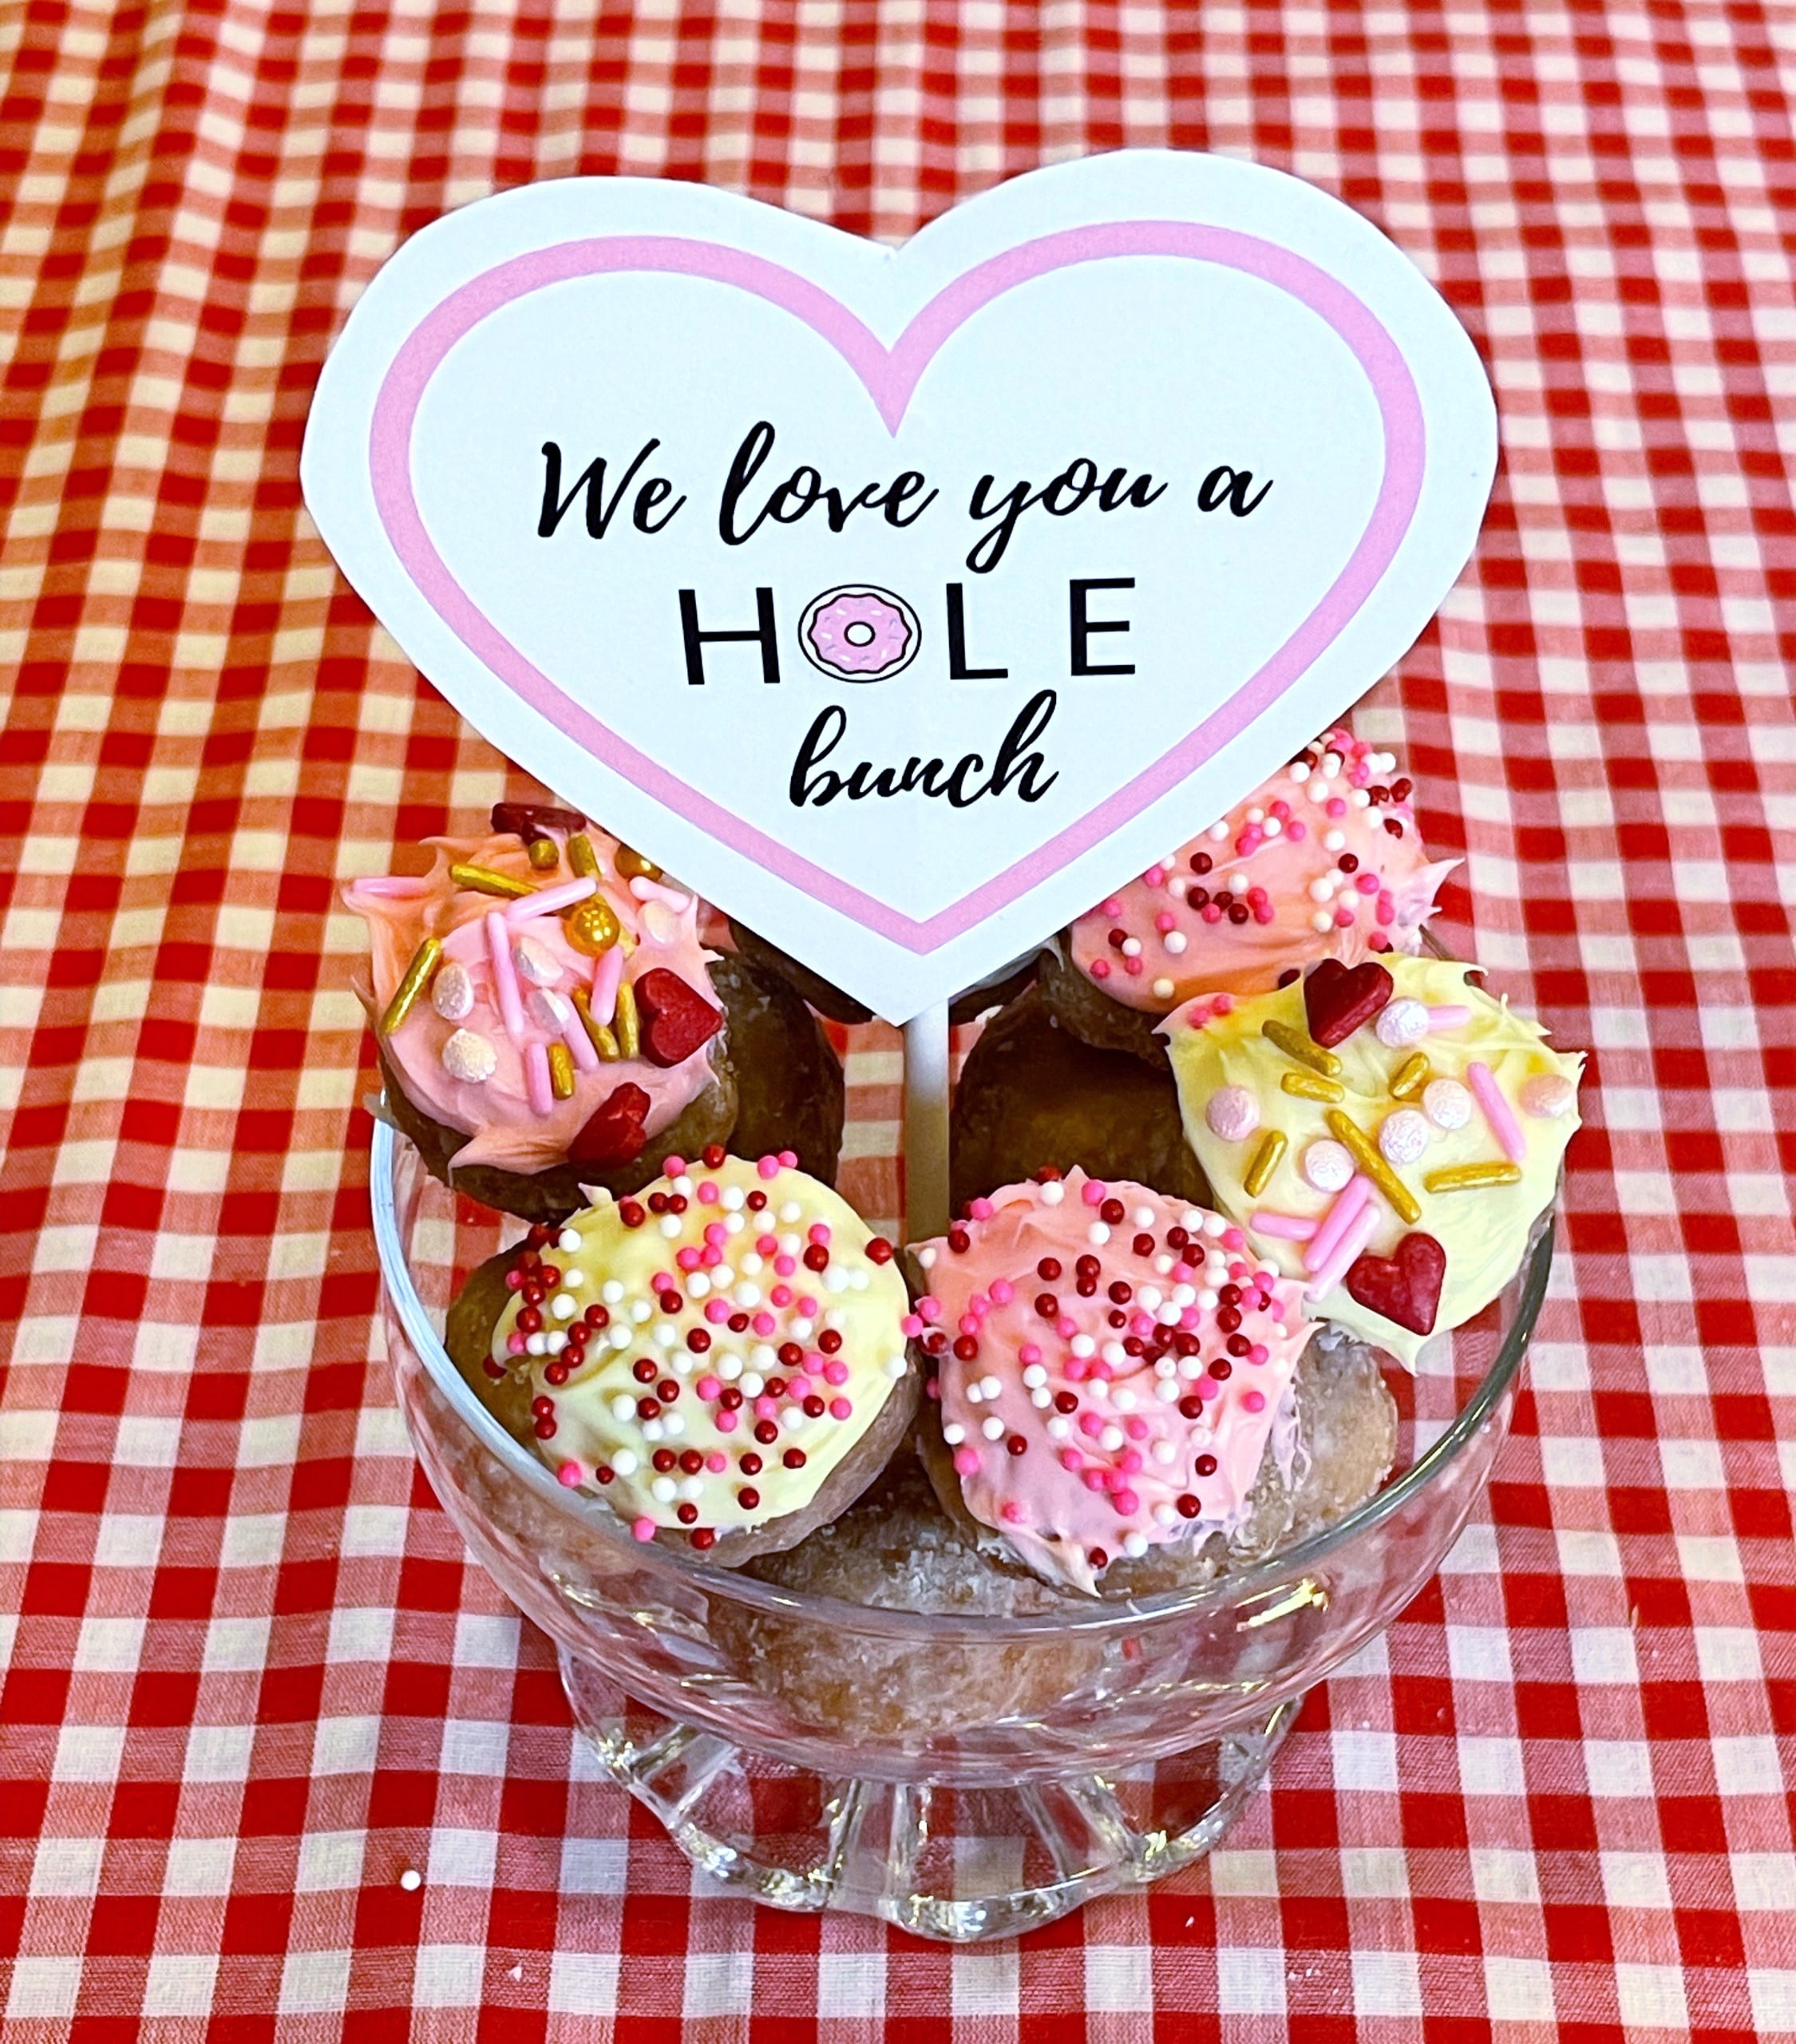 Donut holes with icing and sprinkles and Valentine's Day Sign